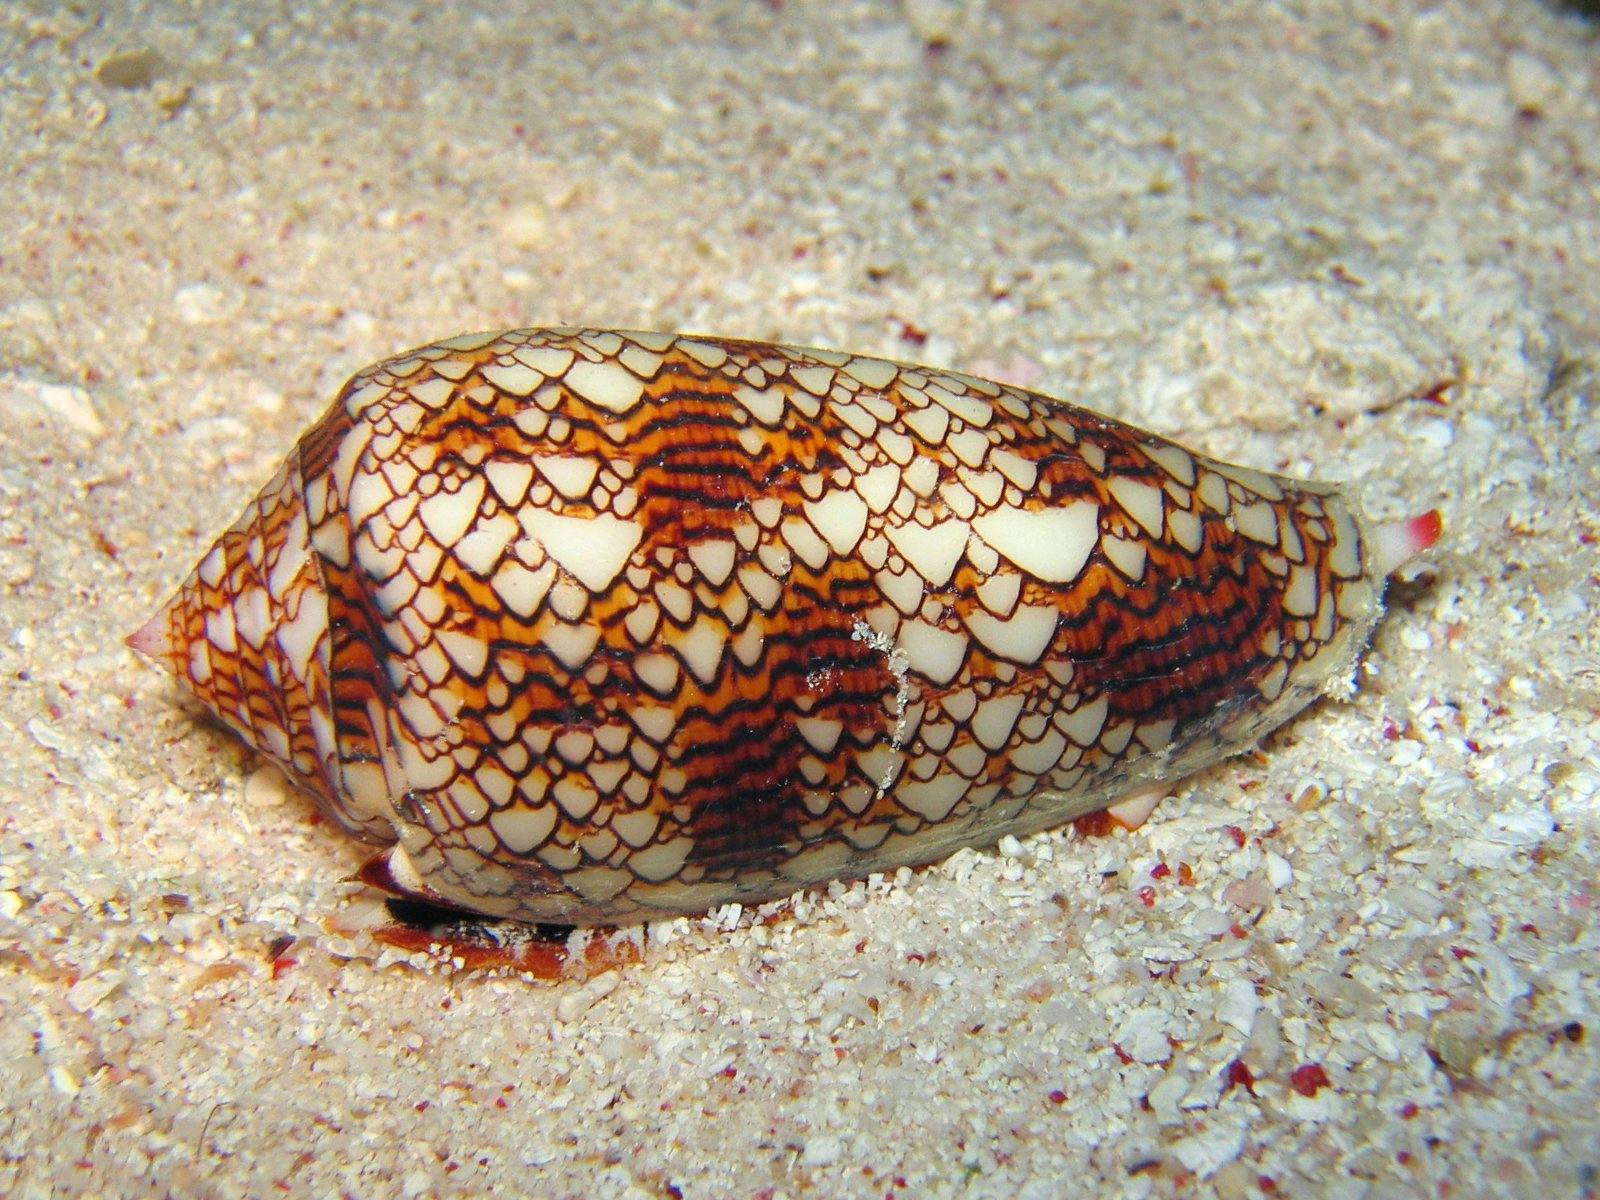 A Conus textile shell similar in appearance to cellular automation with Rule 30. Image: Wikipedia (Copyright 2005, Richard Ling)